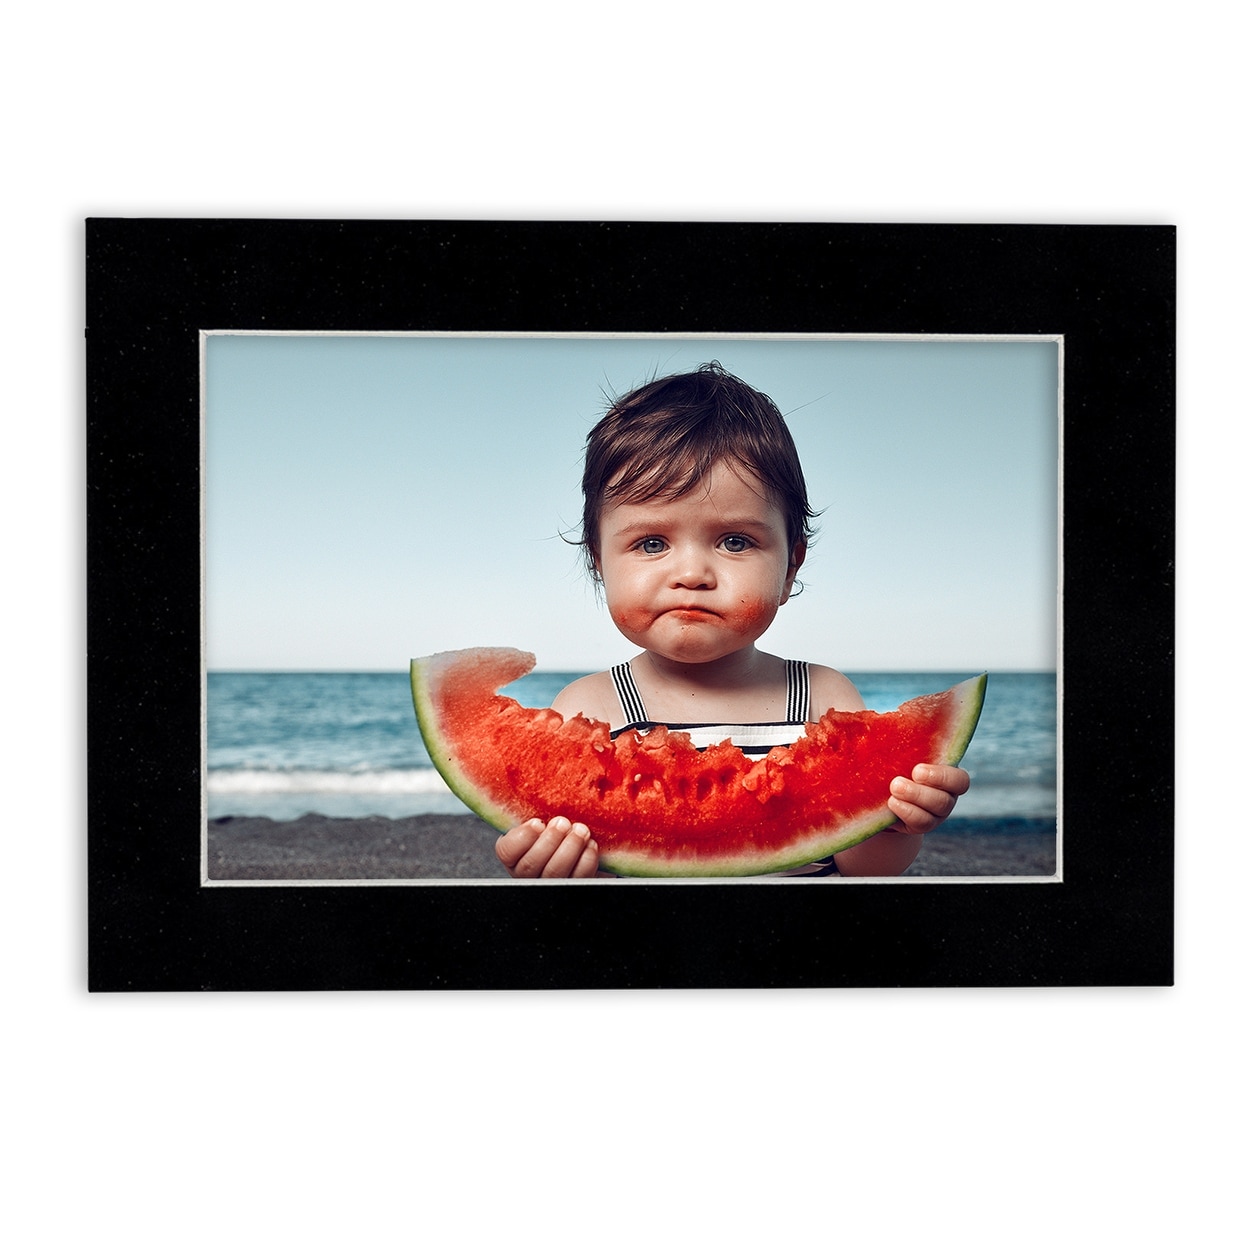 24x36 Mat for 20x30 Photo - Aged Oak Brown Matboard for Frames Measuring 24  x 36 In- To Display Art Measuring 20 x 30 Inches - Bed Bath & Beyond -  38871342